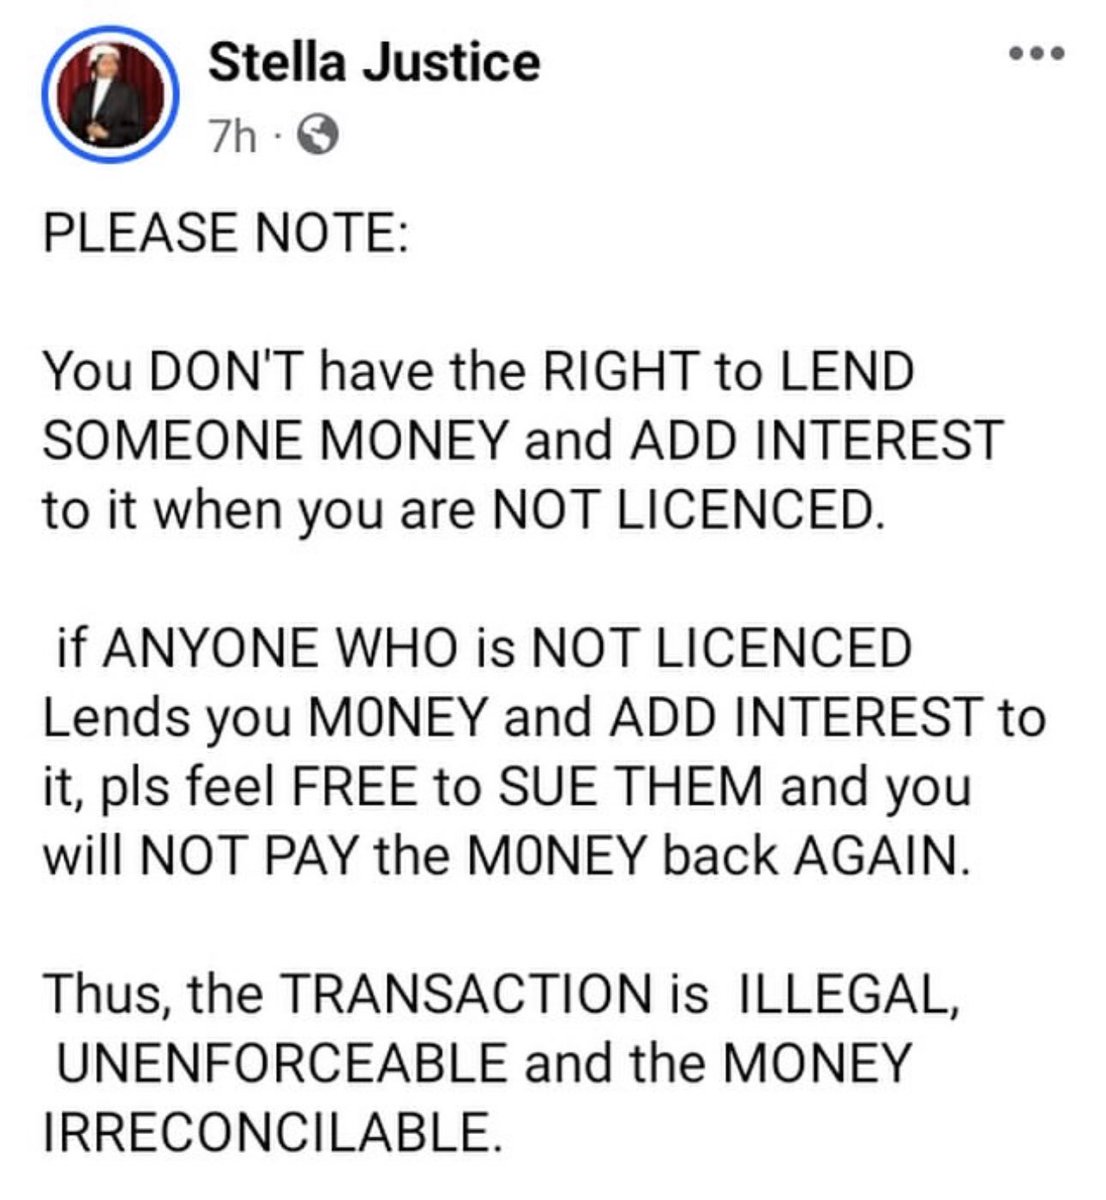 This is not entirely correct, with due respect. The lender can still recover the money lent to you. Only the interest is irrecoverable. Also, you do not have a cause of action to sue someone that lends you money simply because they added interest to it. At best it would be a